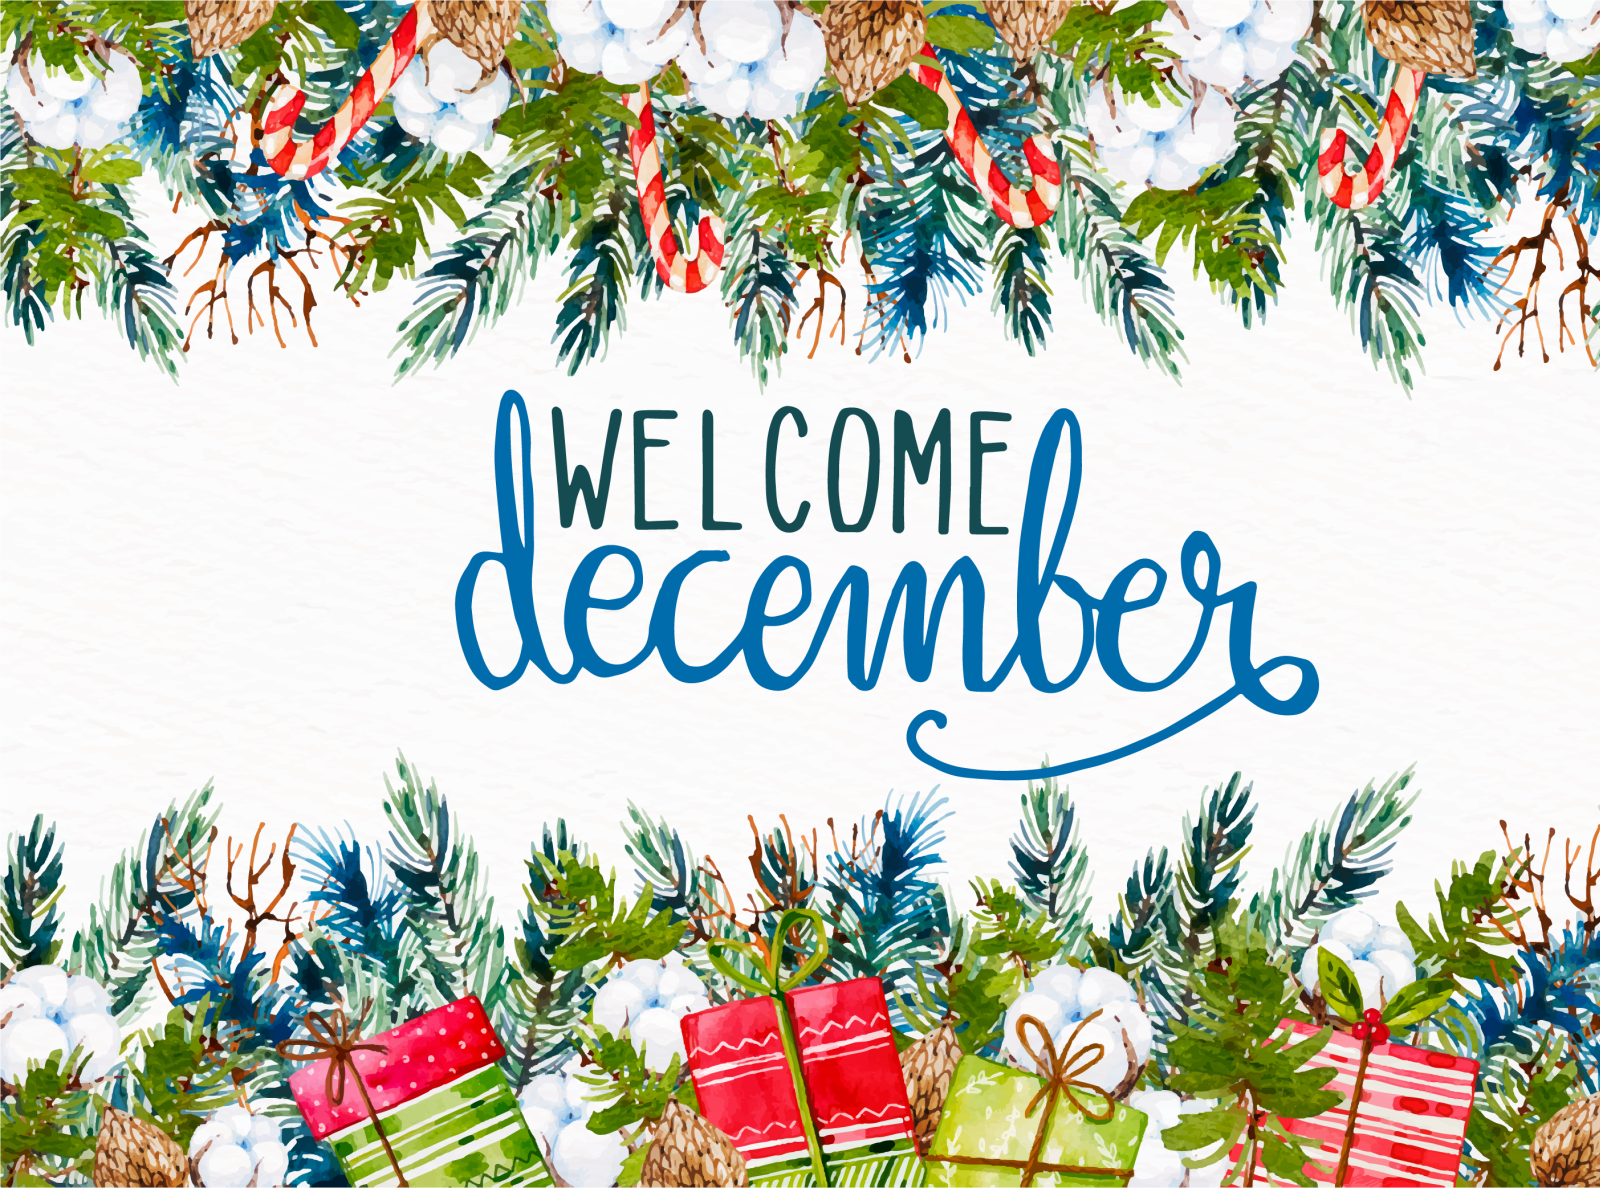 Welcome December 2019 in Moldova! by Cromatix Creative Image Lab ...